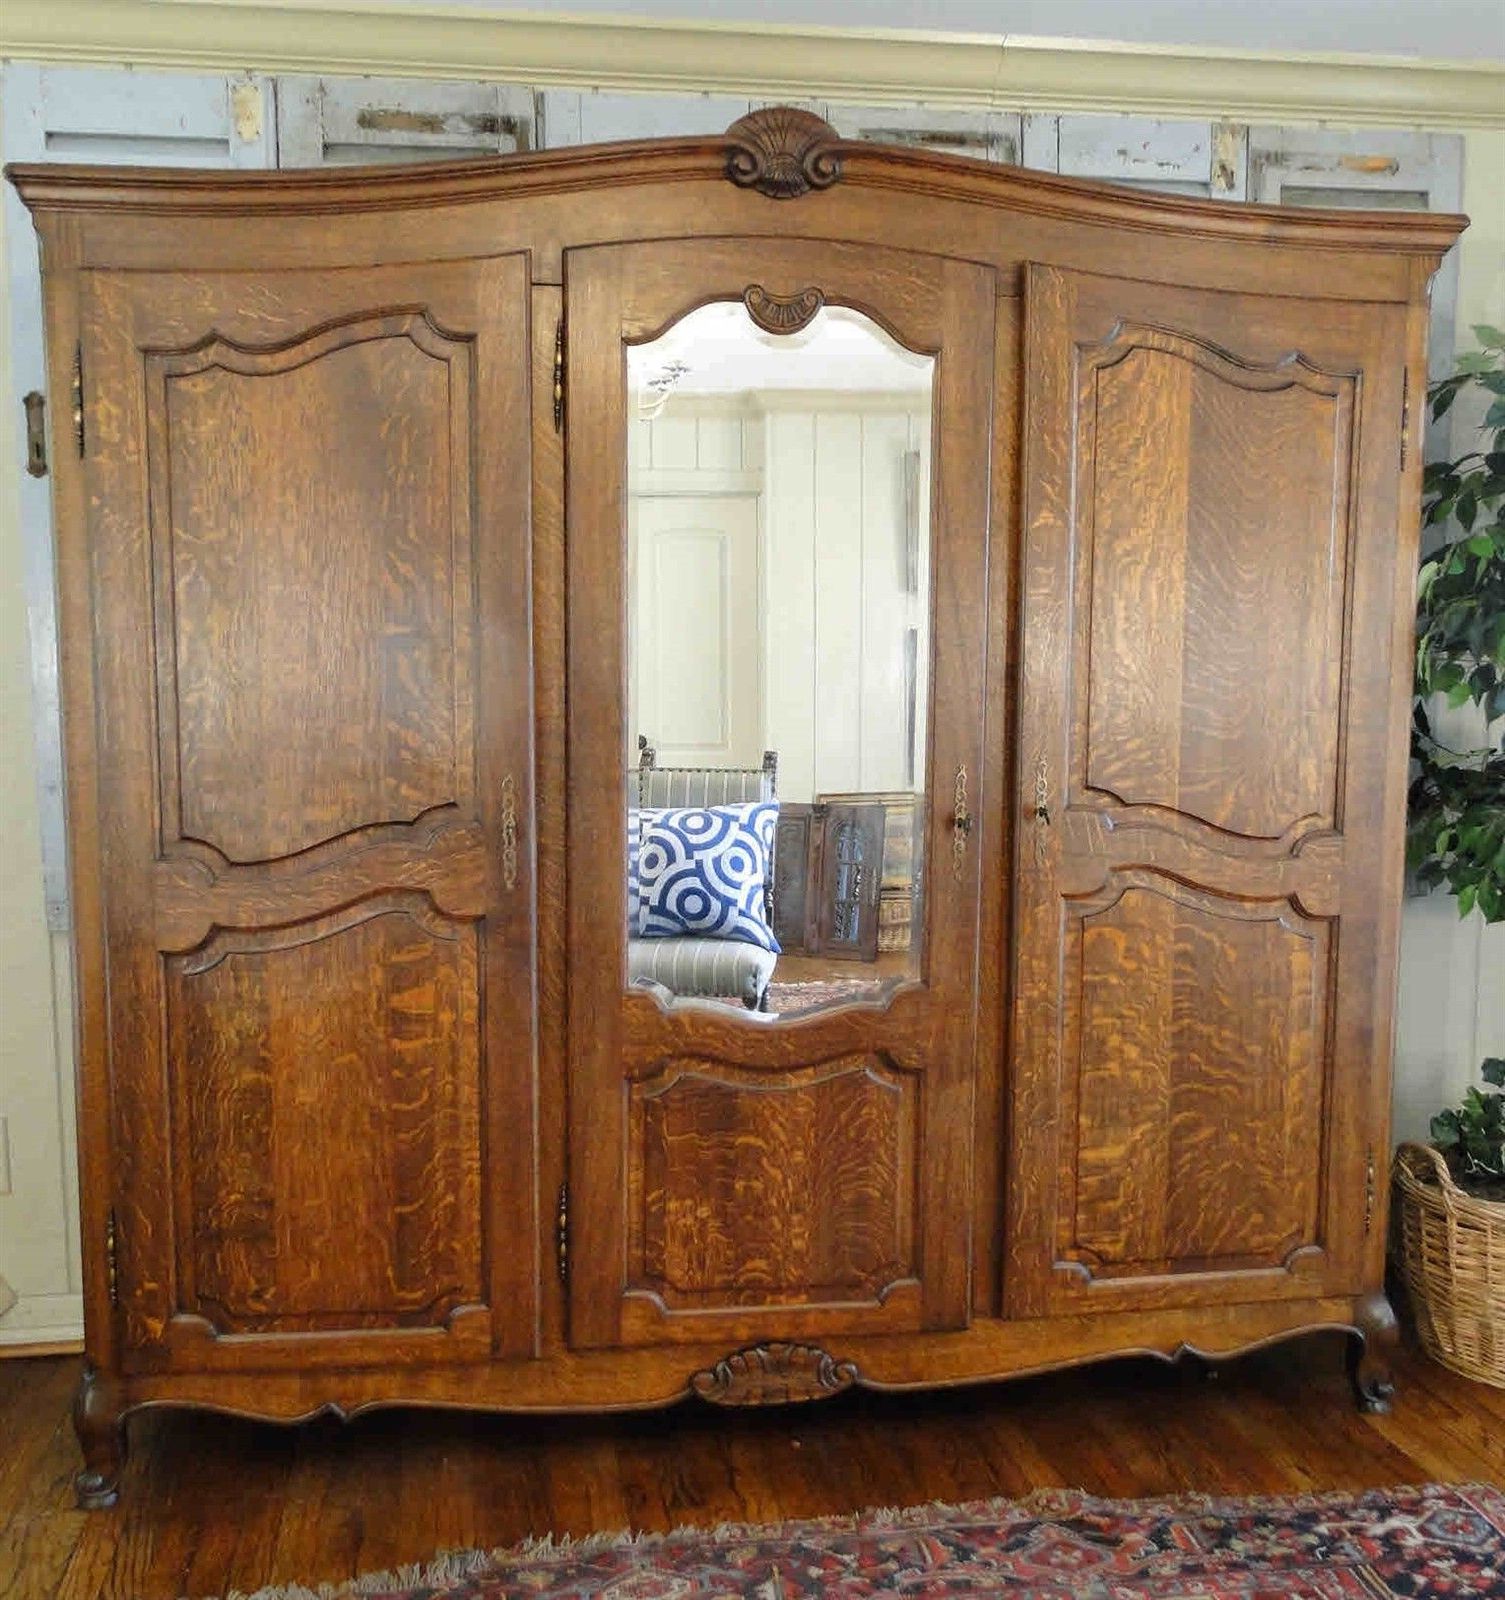 Antique French Country Wardrobe Armoire 3 Door Shelves Hanging Rod Mirror  Carved Regarding 3 Door French Wardrobes (View 16 of 20)